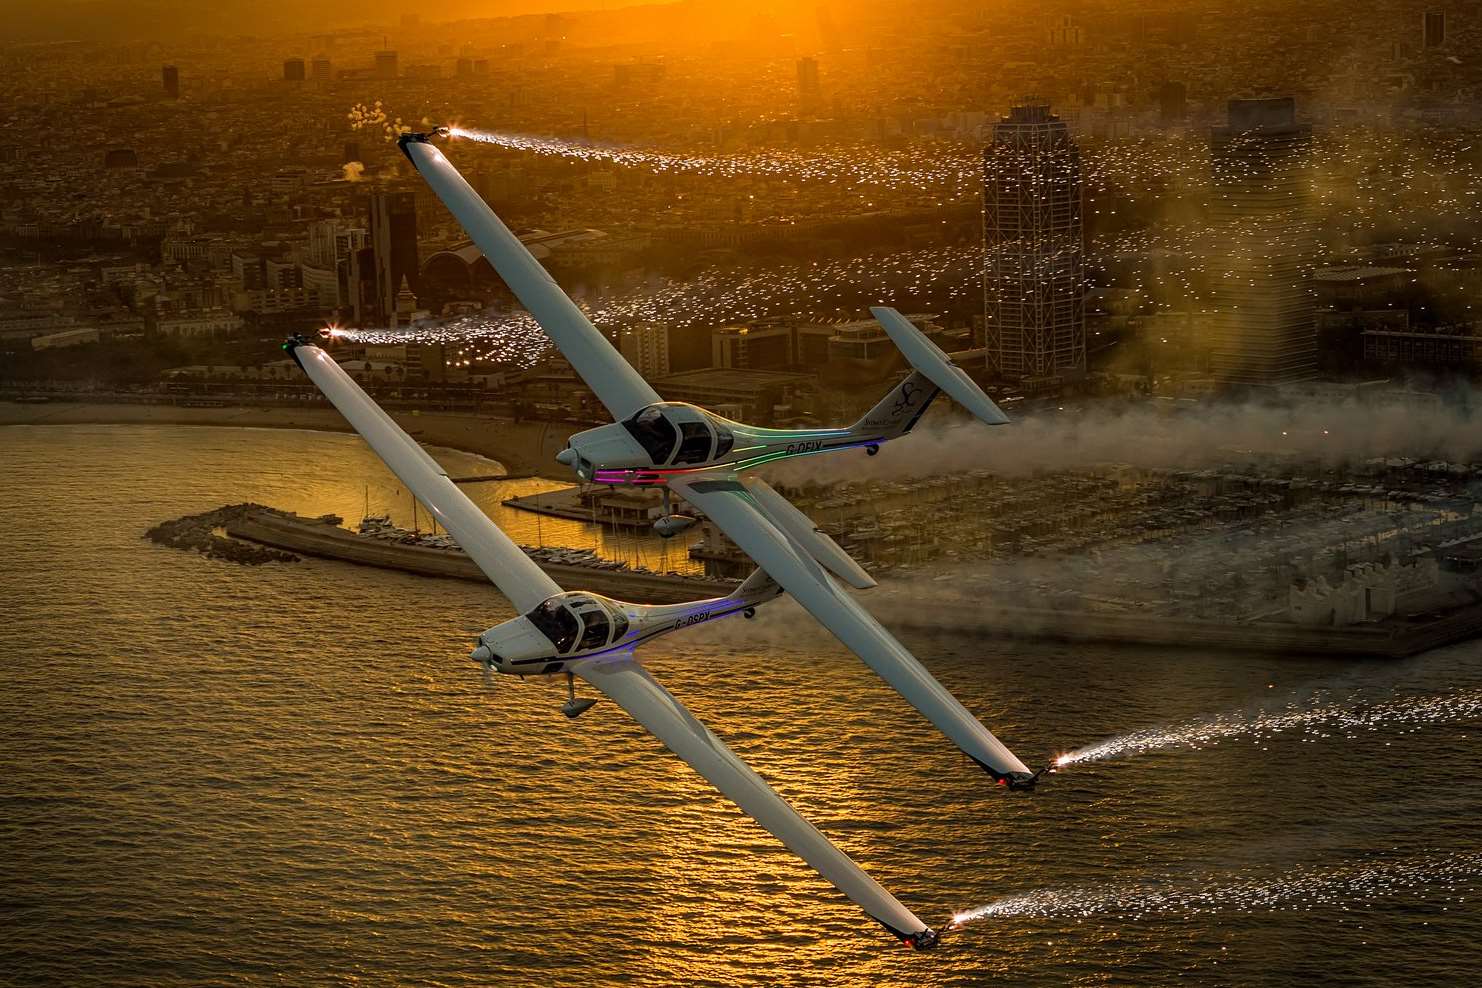 The AeroSPARX display team will be in action. Picture: Toni Tejon